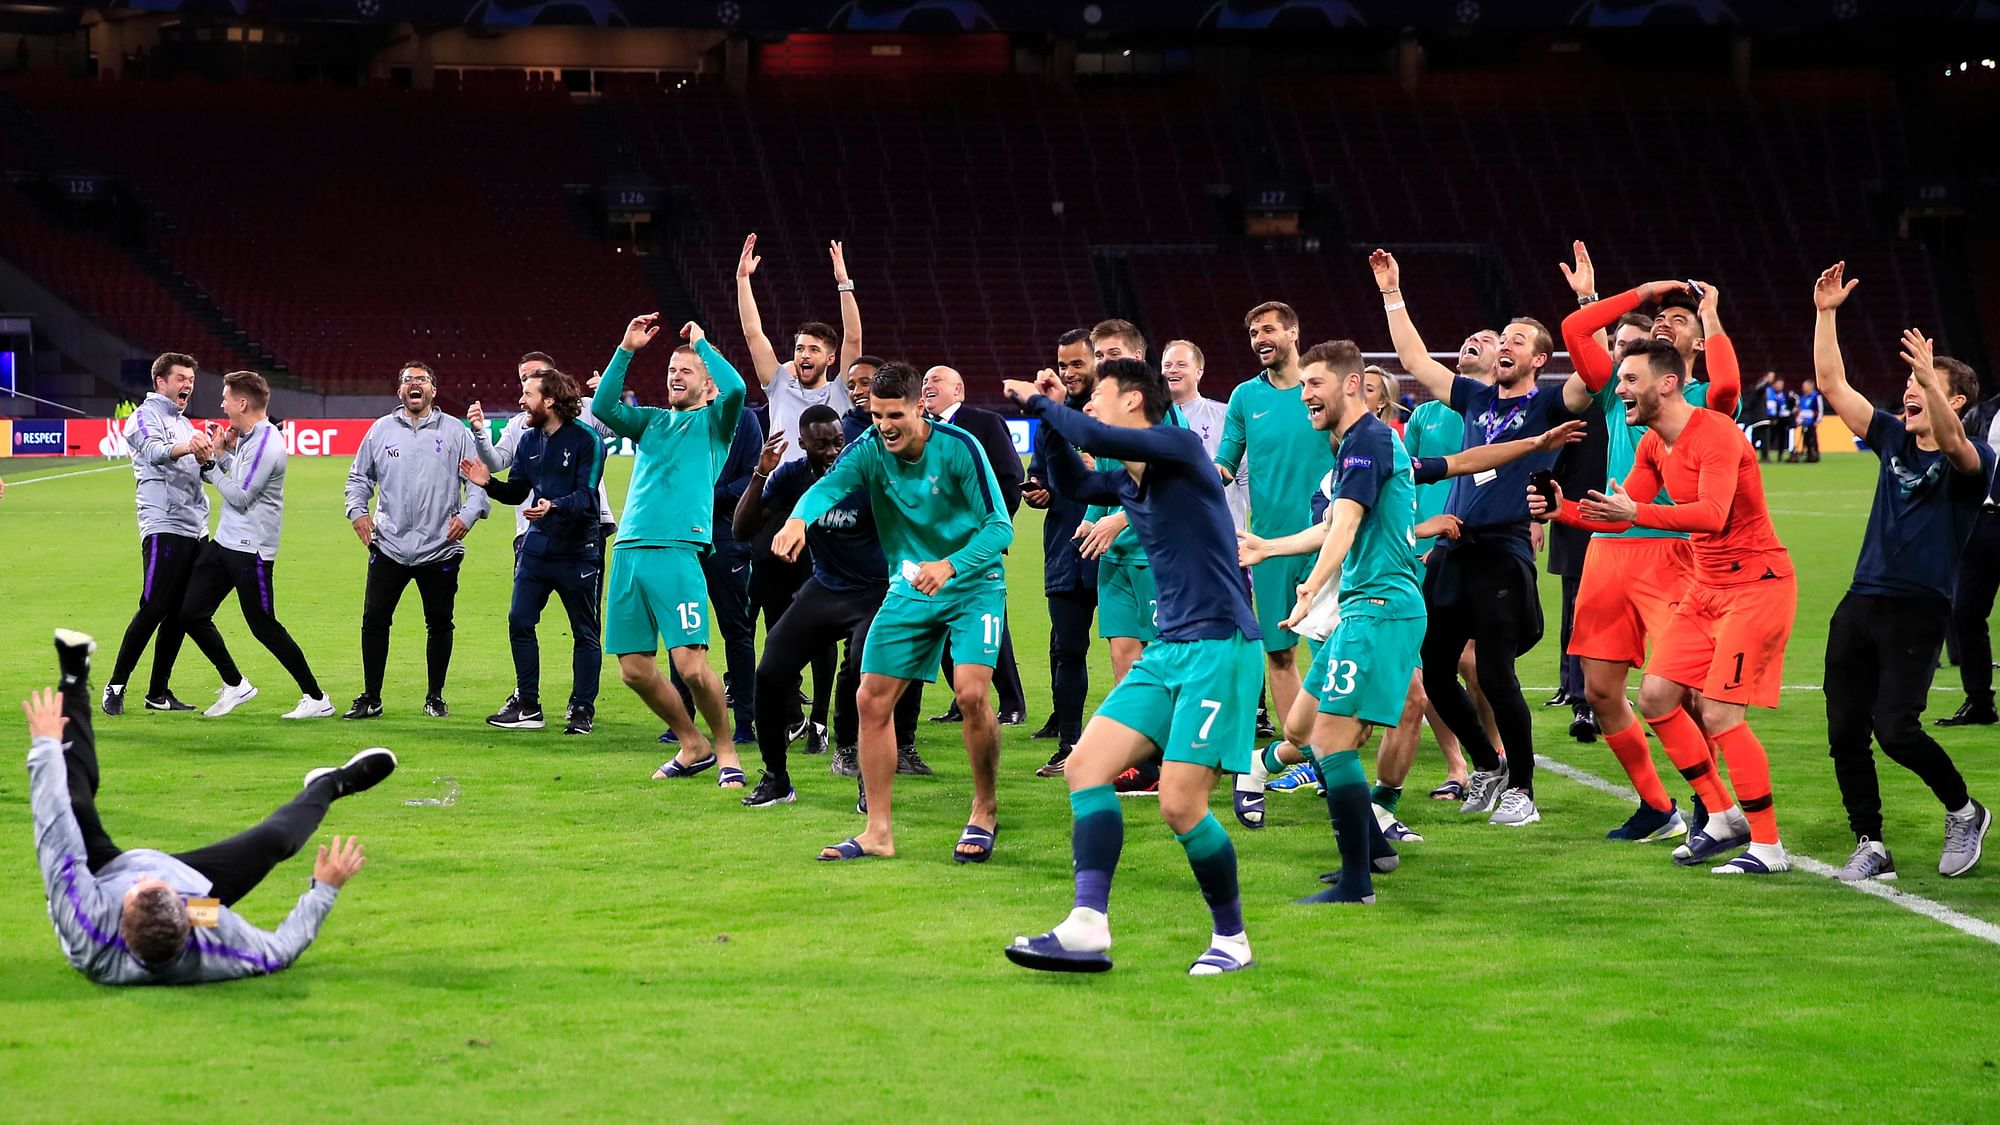 Tottenham Hotspur players celebrate their victory in the Champions League Semi-final against Ajax.